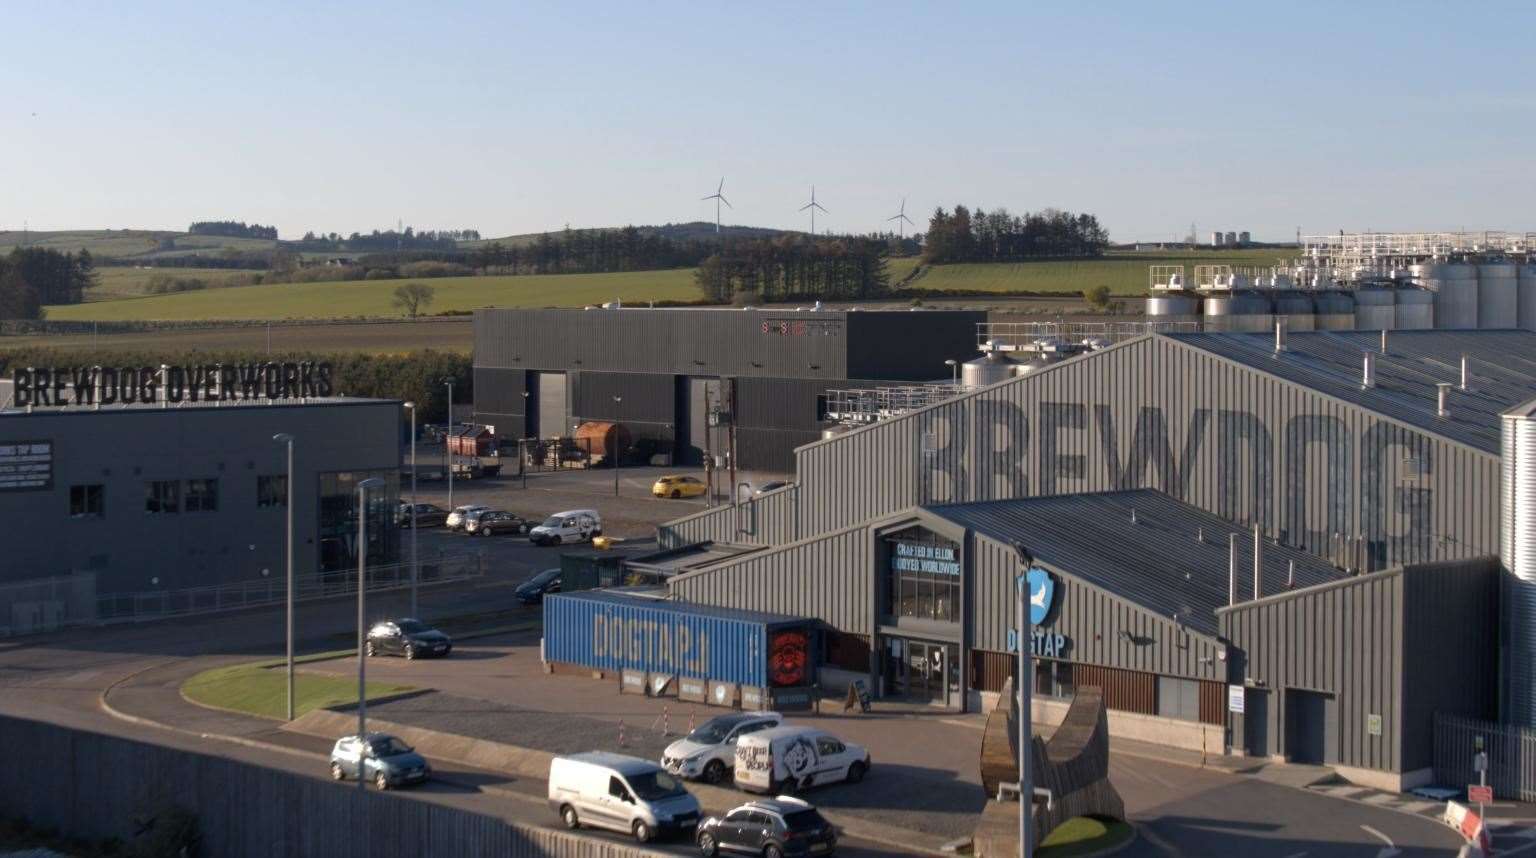 Disclosure will look at the work culture at Brewdog